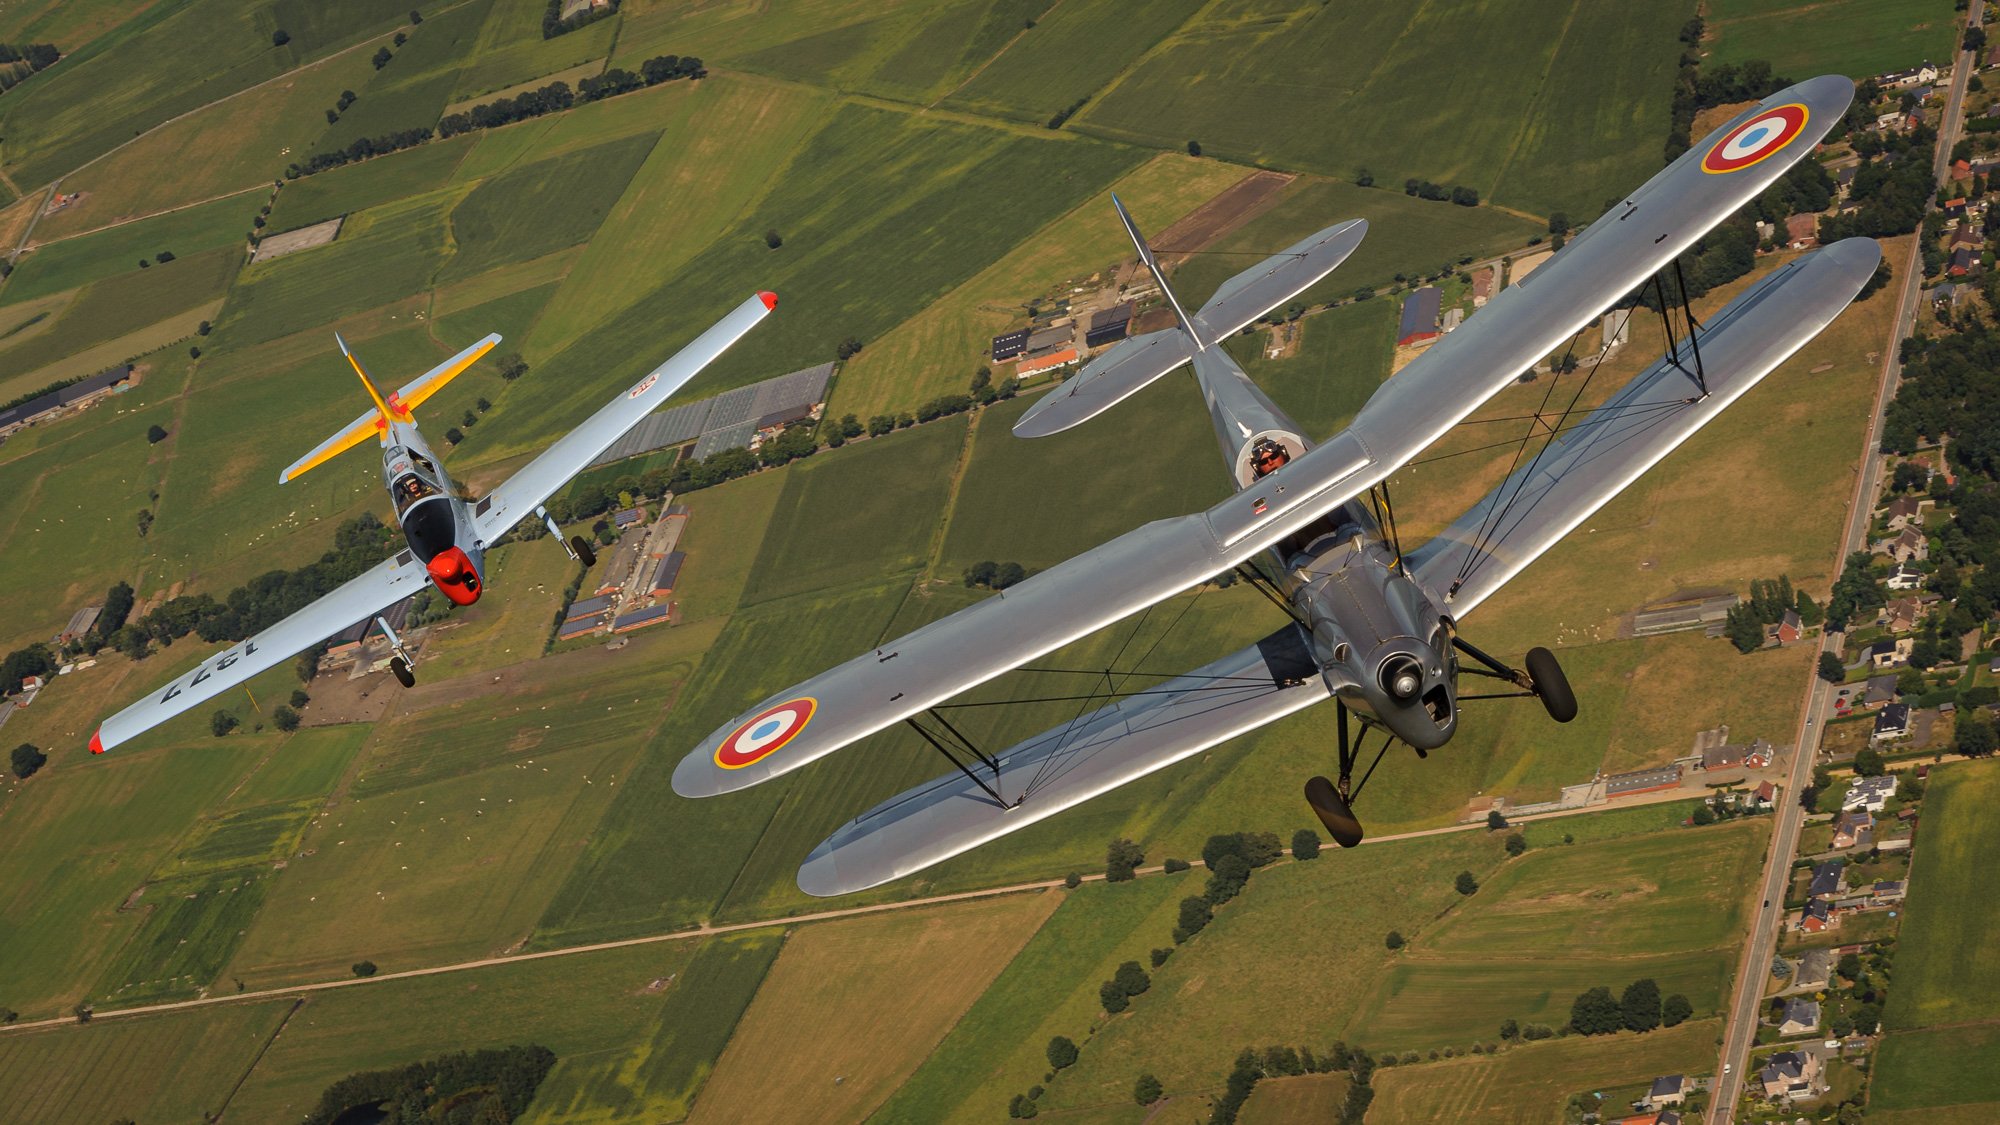 Stampe SV4C and Chipmunk air-to-air